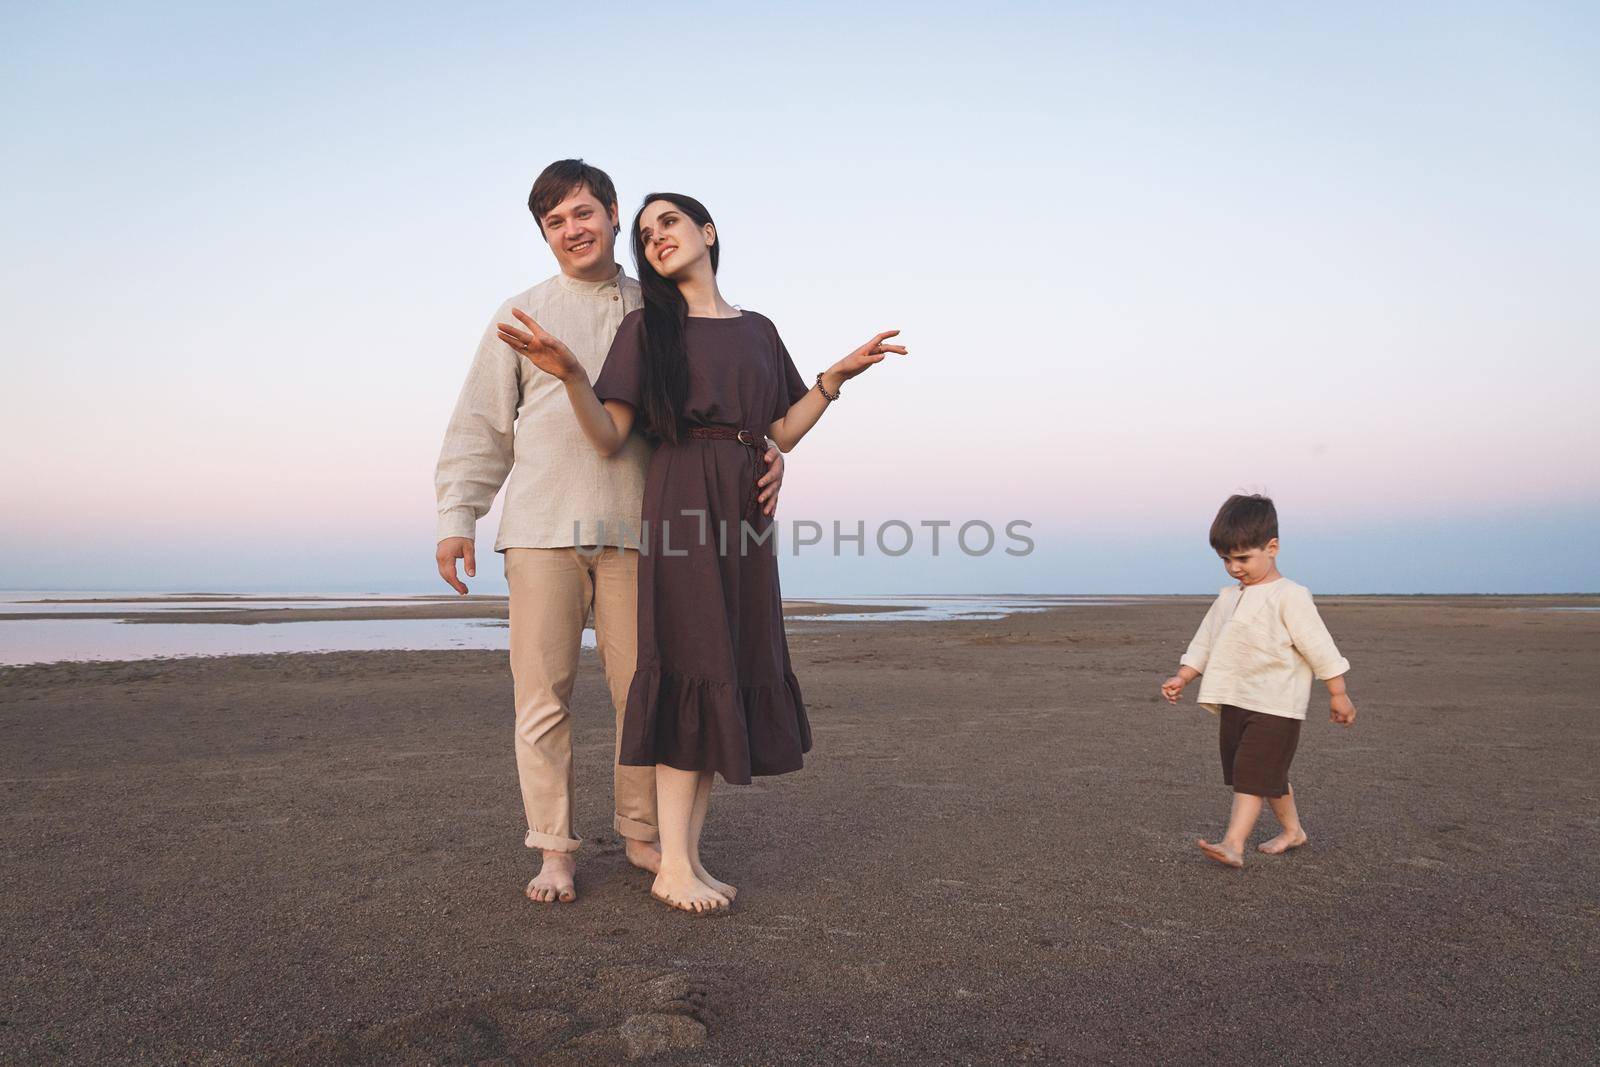 Young family with a three year old son walks barefoot along the wild evening beach. Family look linen clothes.